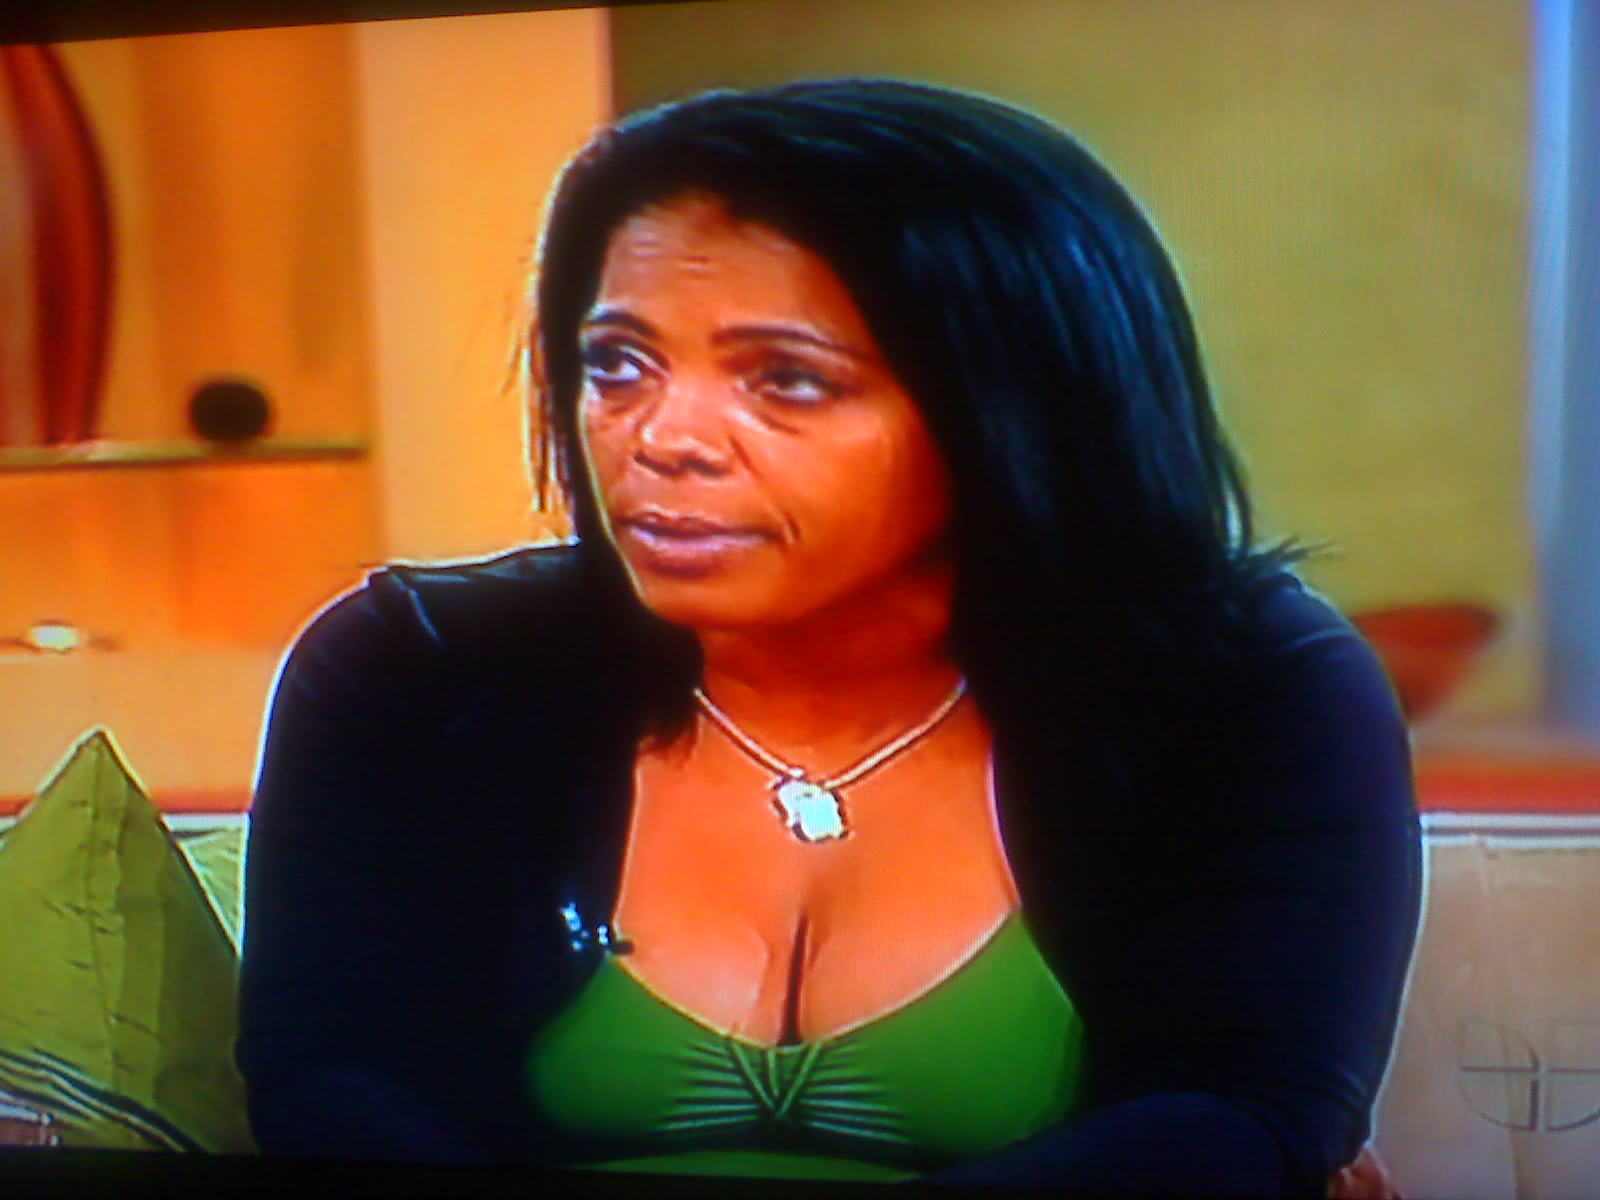 lolz watchin the spanish channel and came across this spanish looking oprah